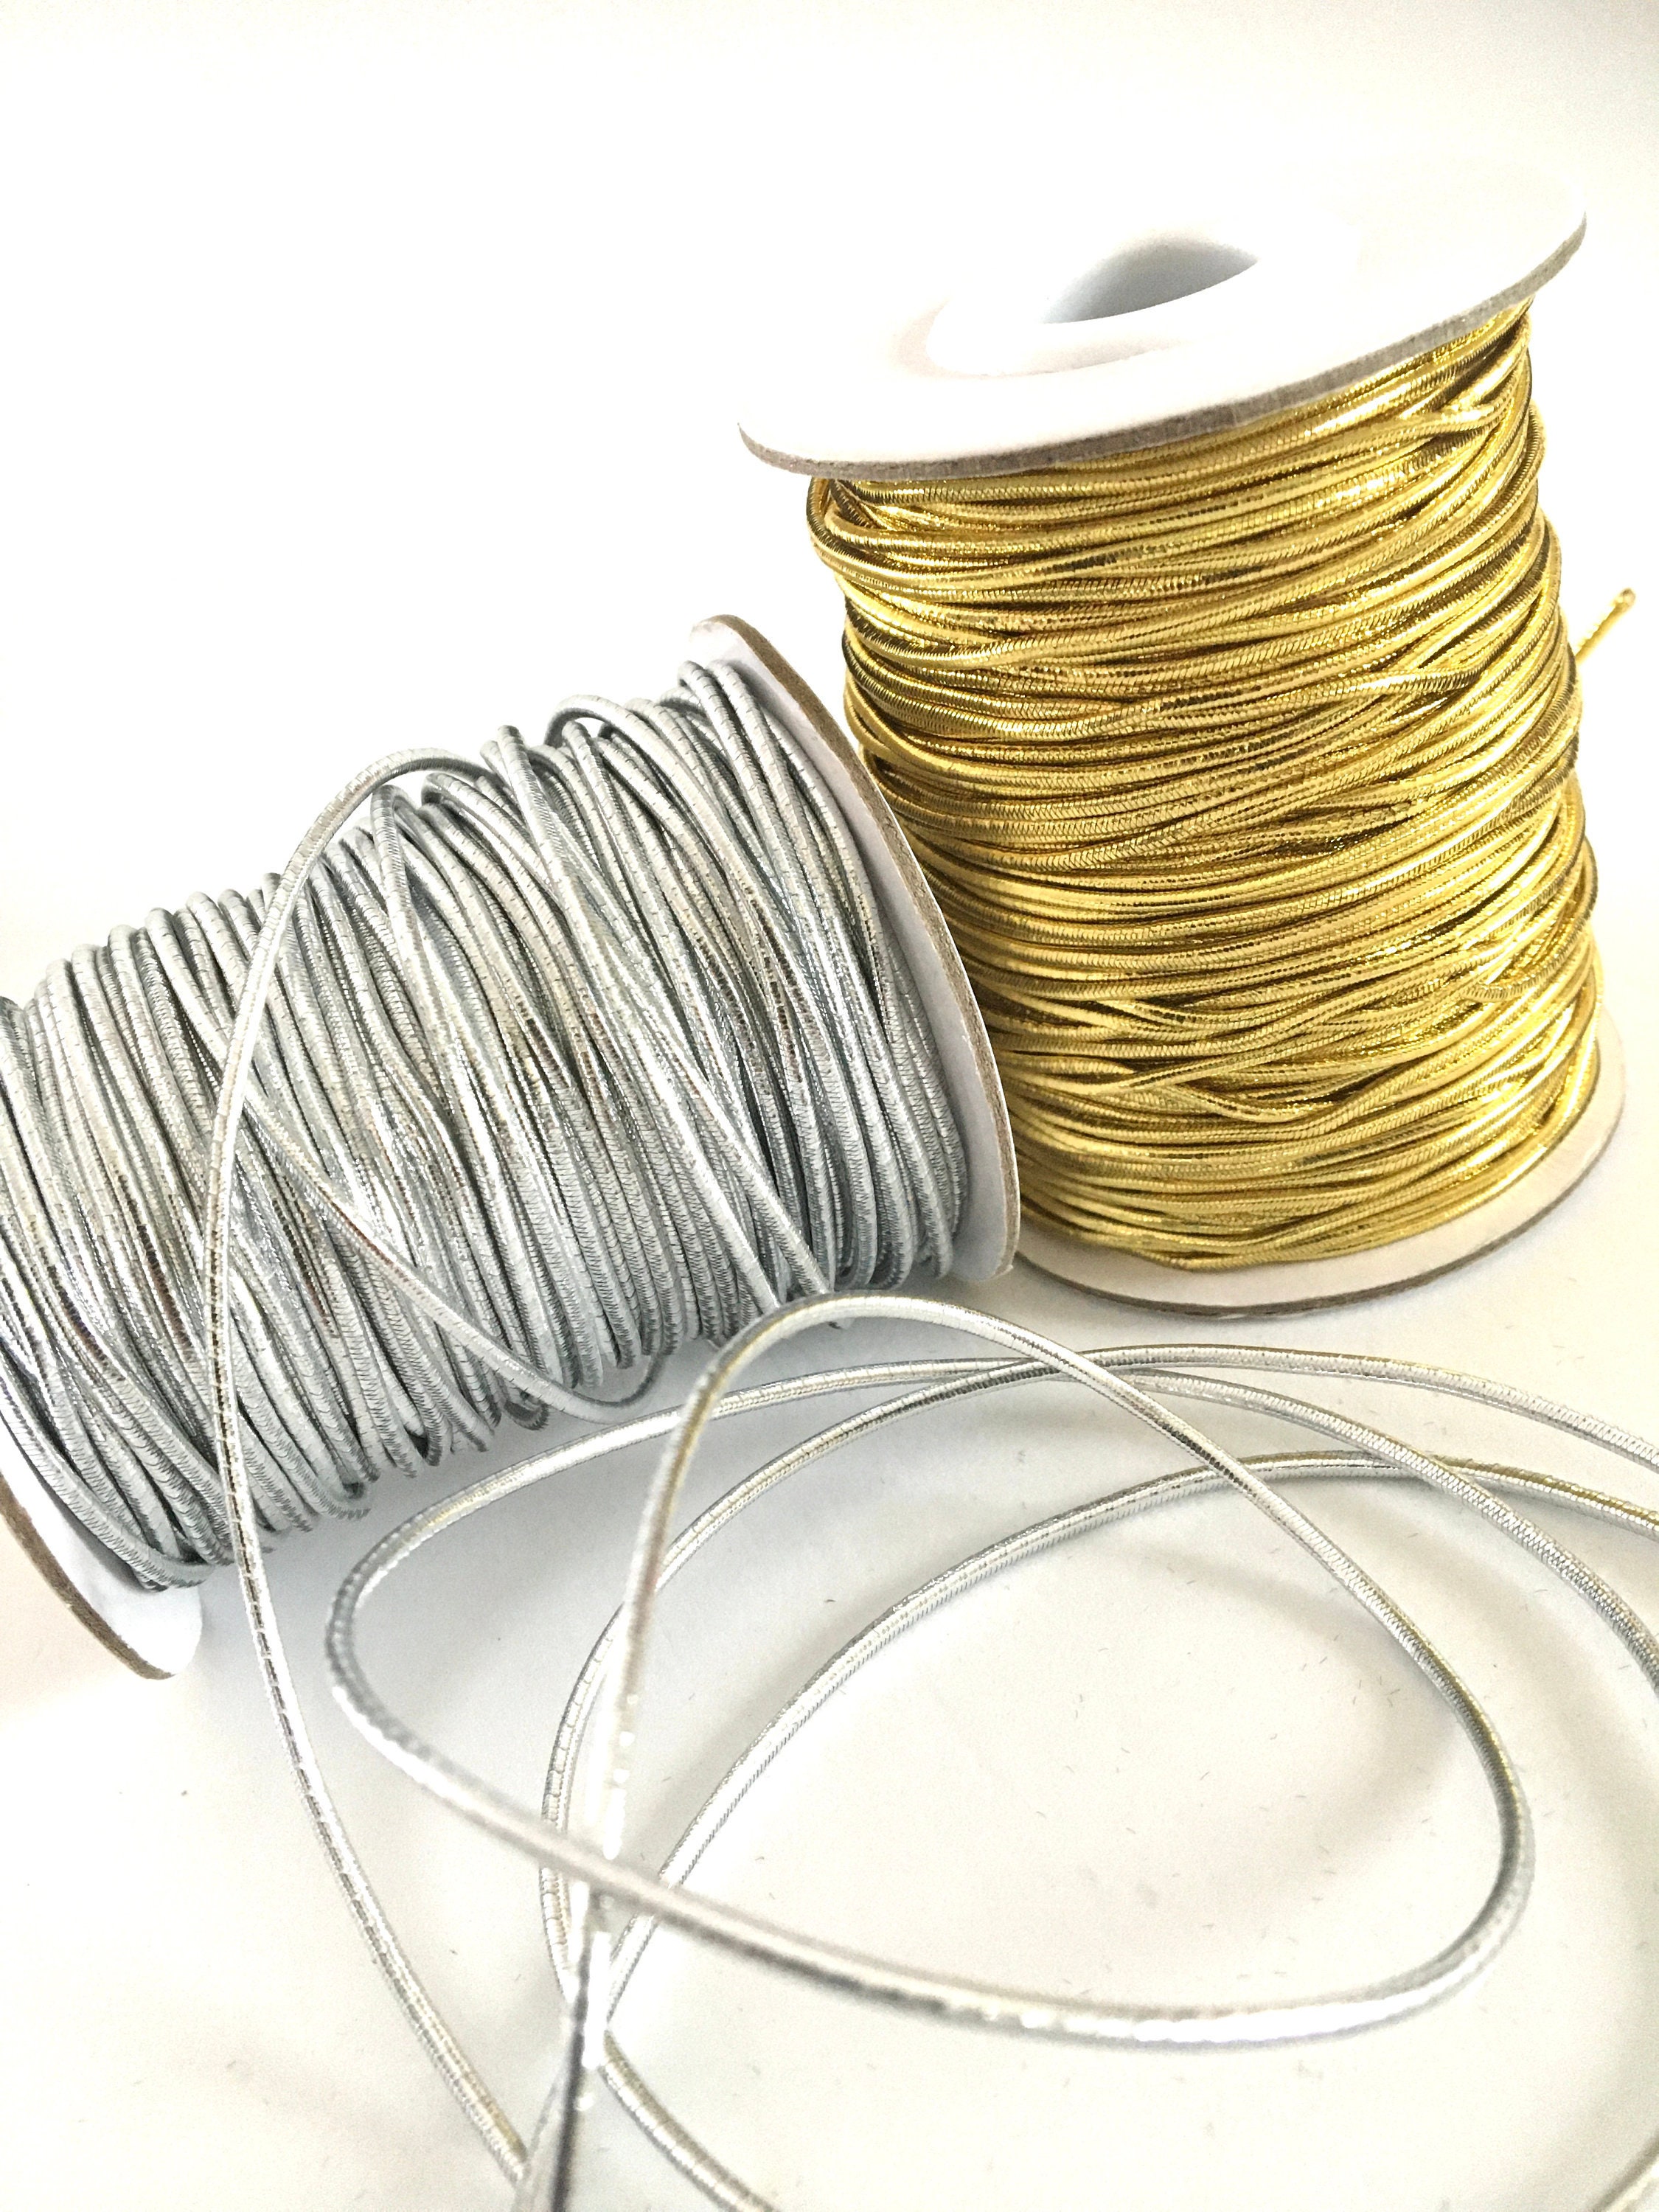 50 Meters Gold or Silver Metallic Cord, Braided String 2mm Thick, DIY  Crafts, Gift Wrap, Sewing, Quilt, Thick Thread, Holiday, Accents, Trim 